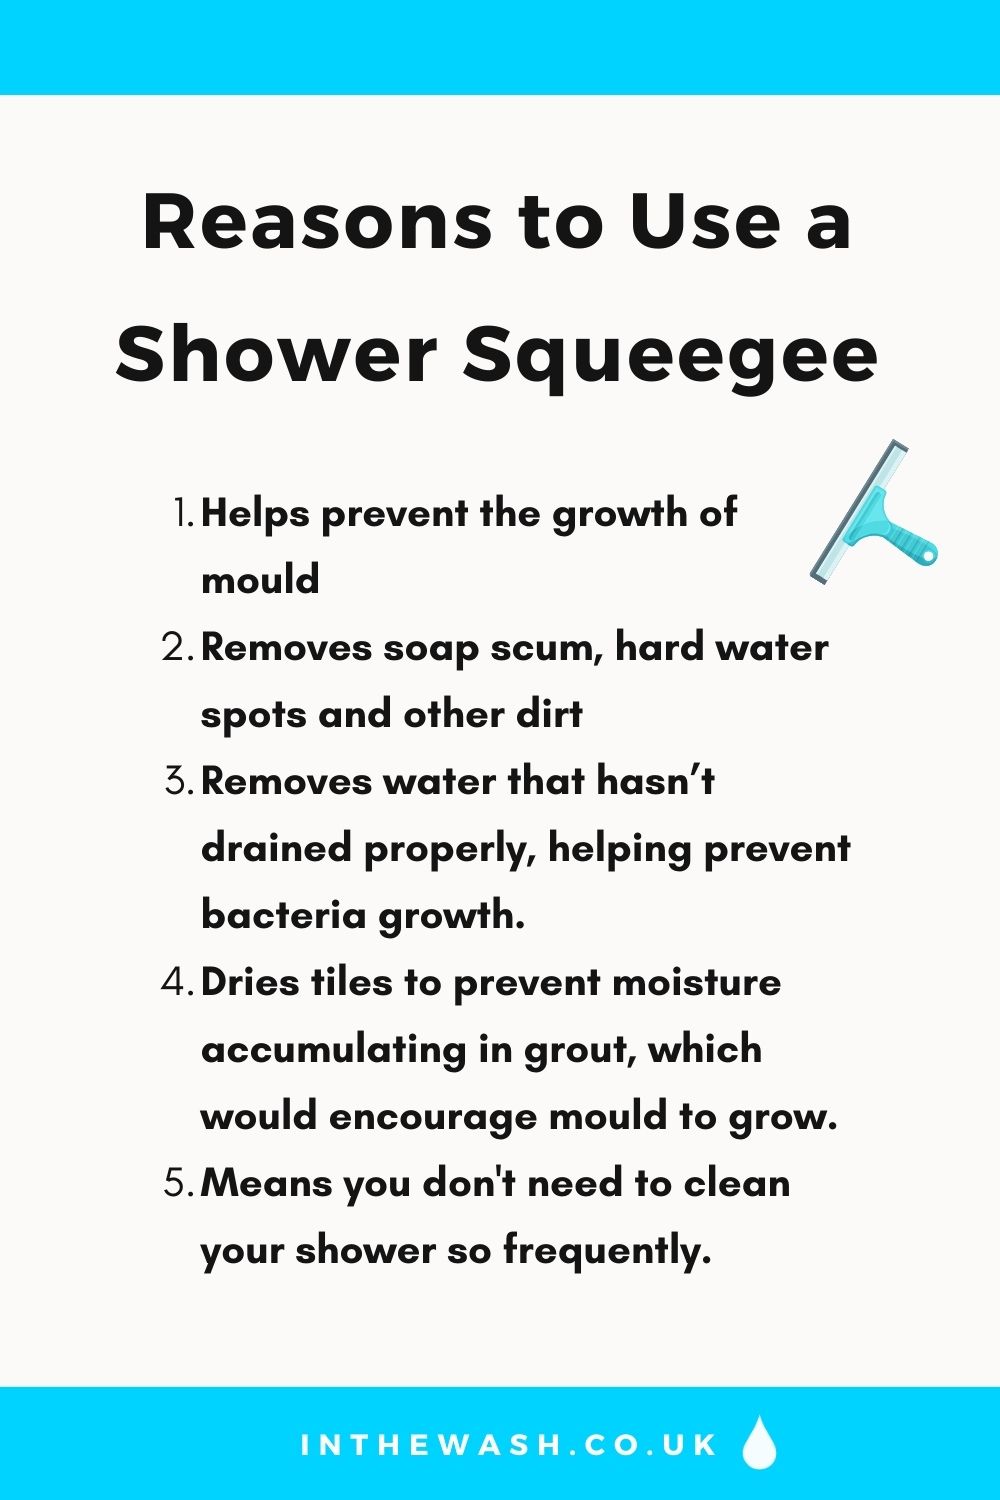 Reasons to use a shower squeegee